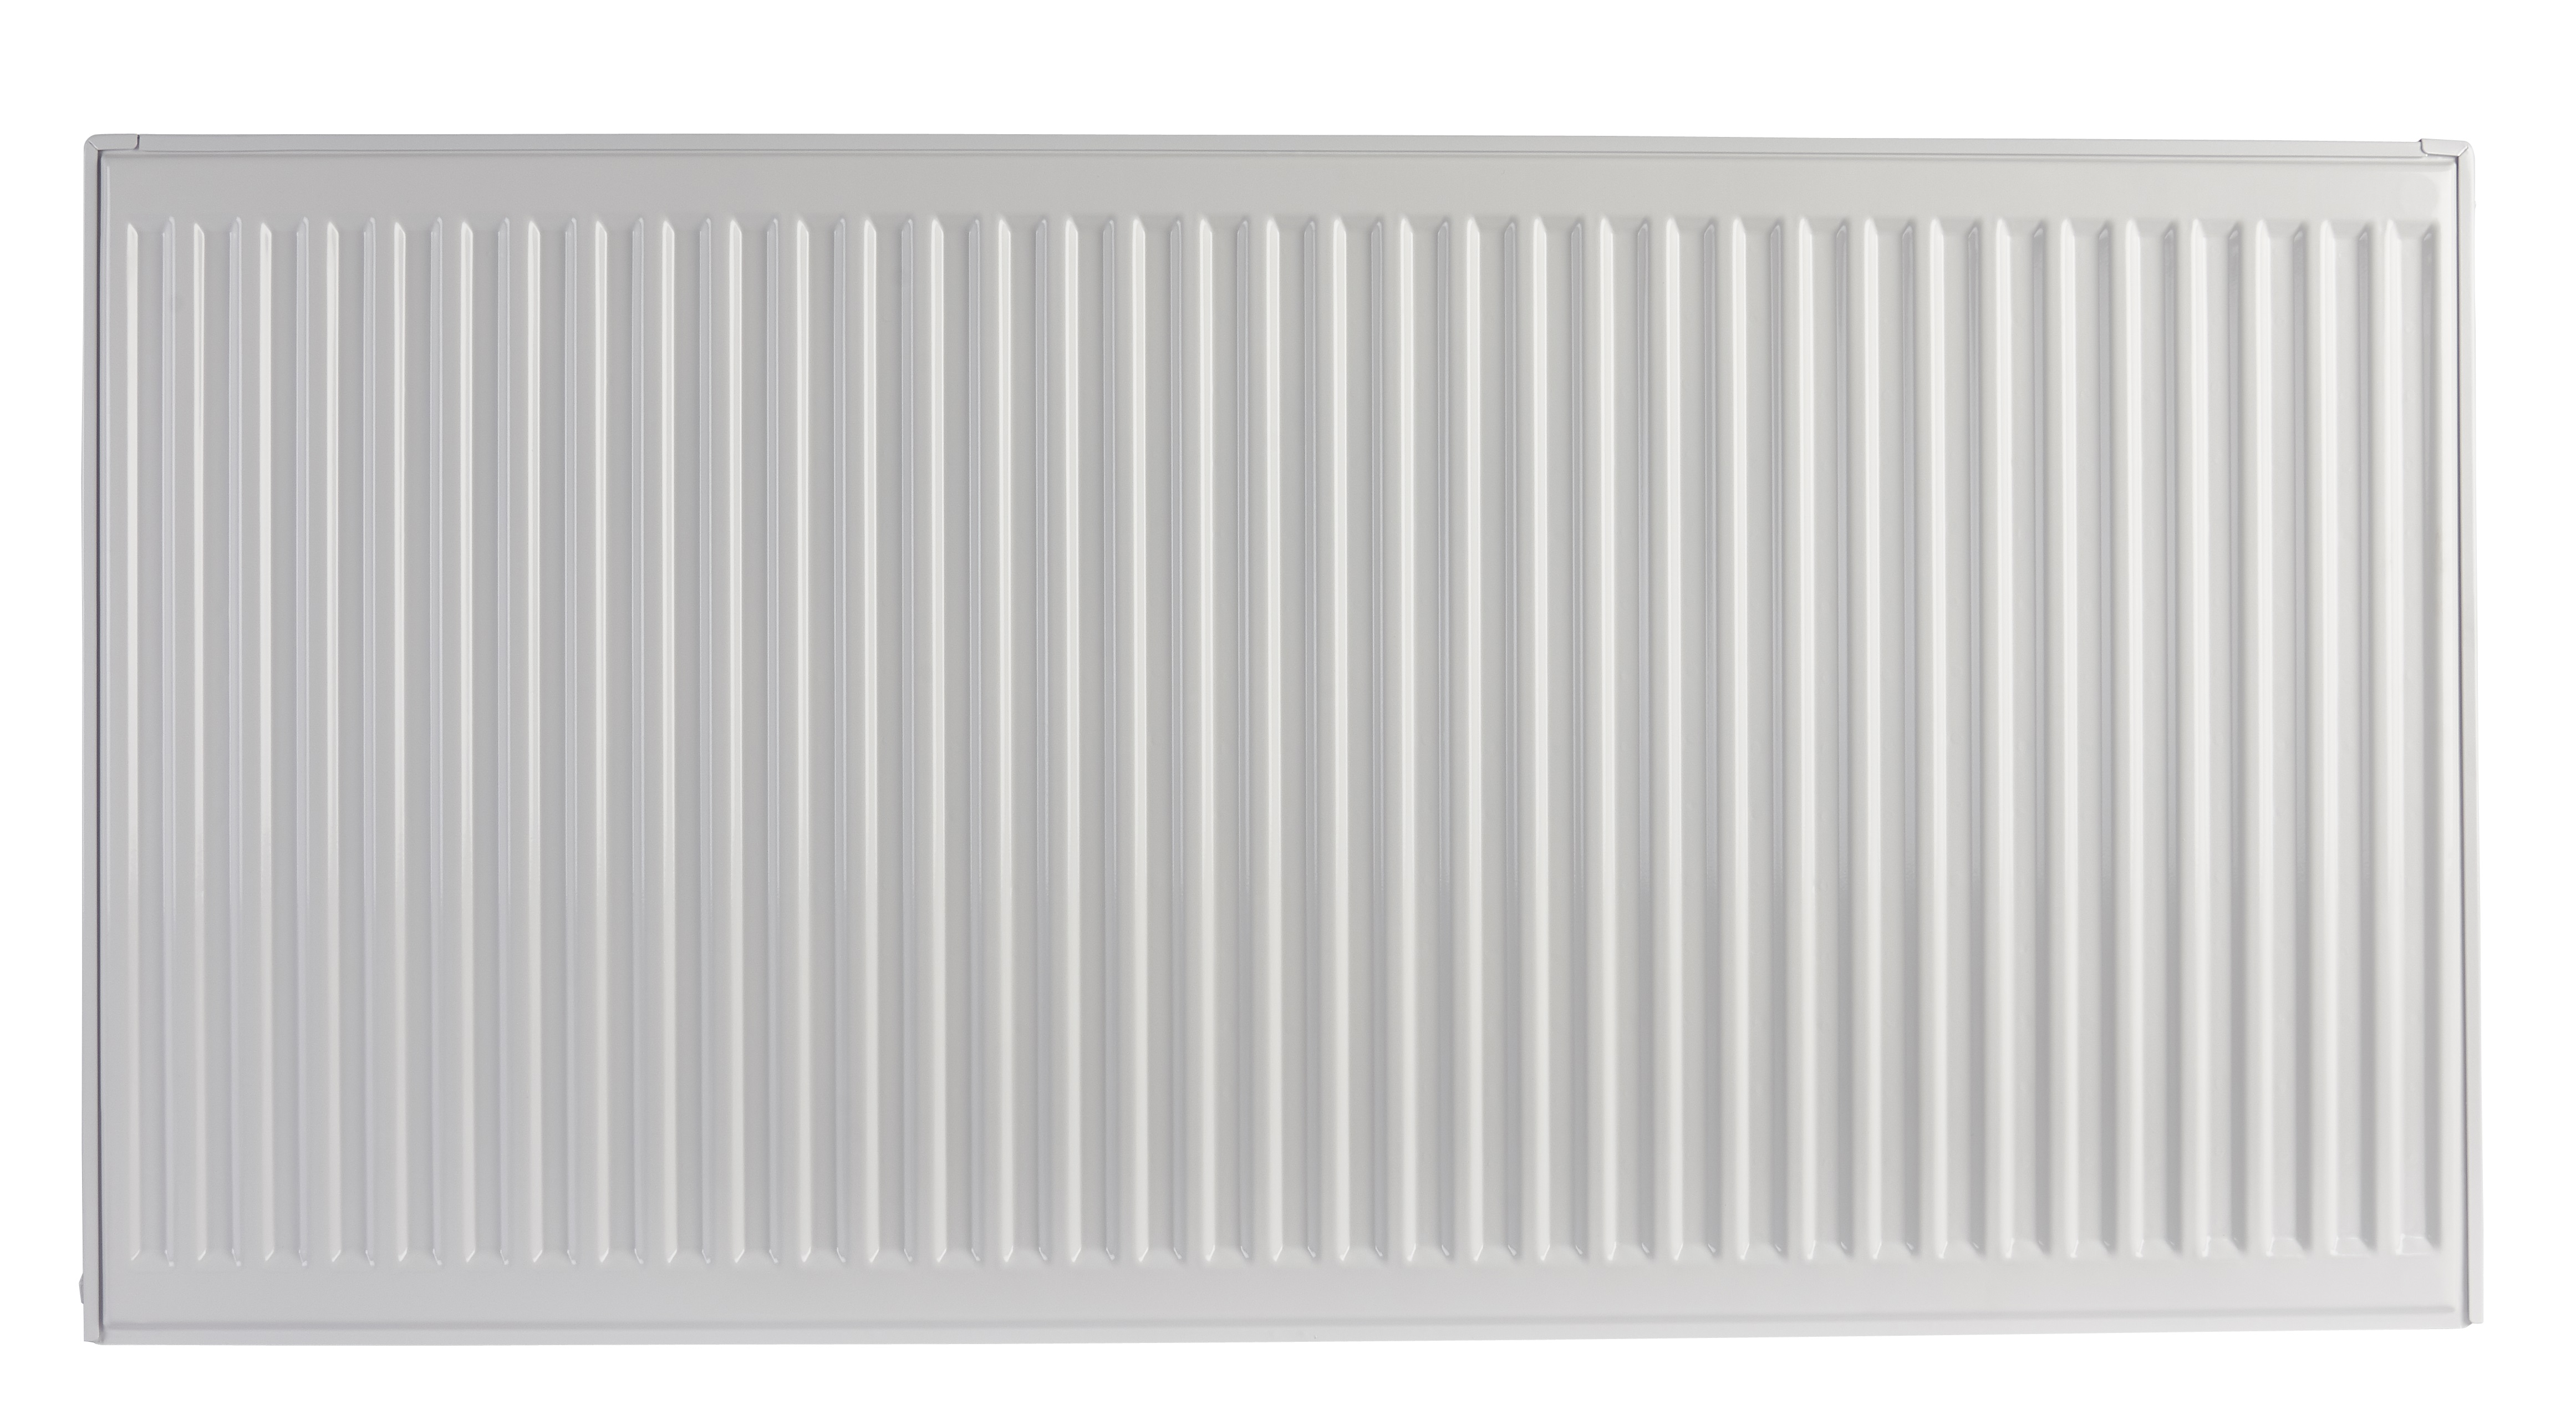 Homeline by Stelrad Type 21 Double Panel Plus Single Convector Radiator - 400 x 600mm